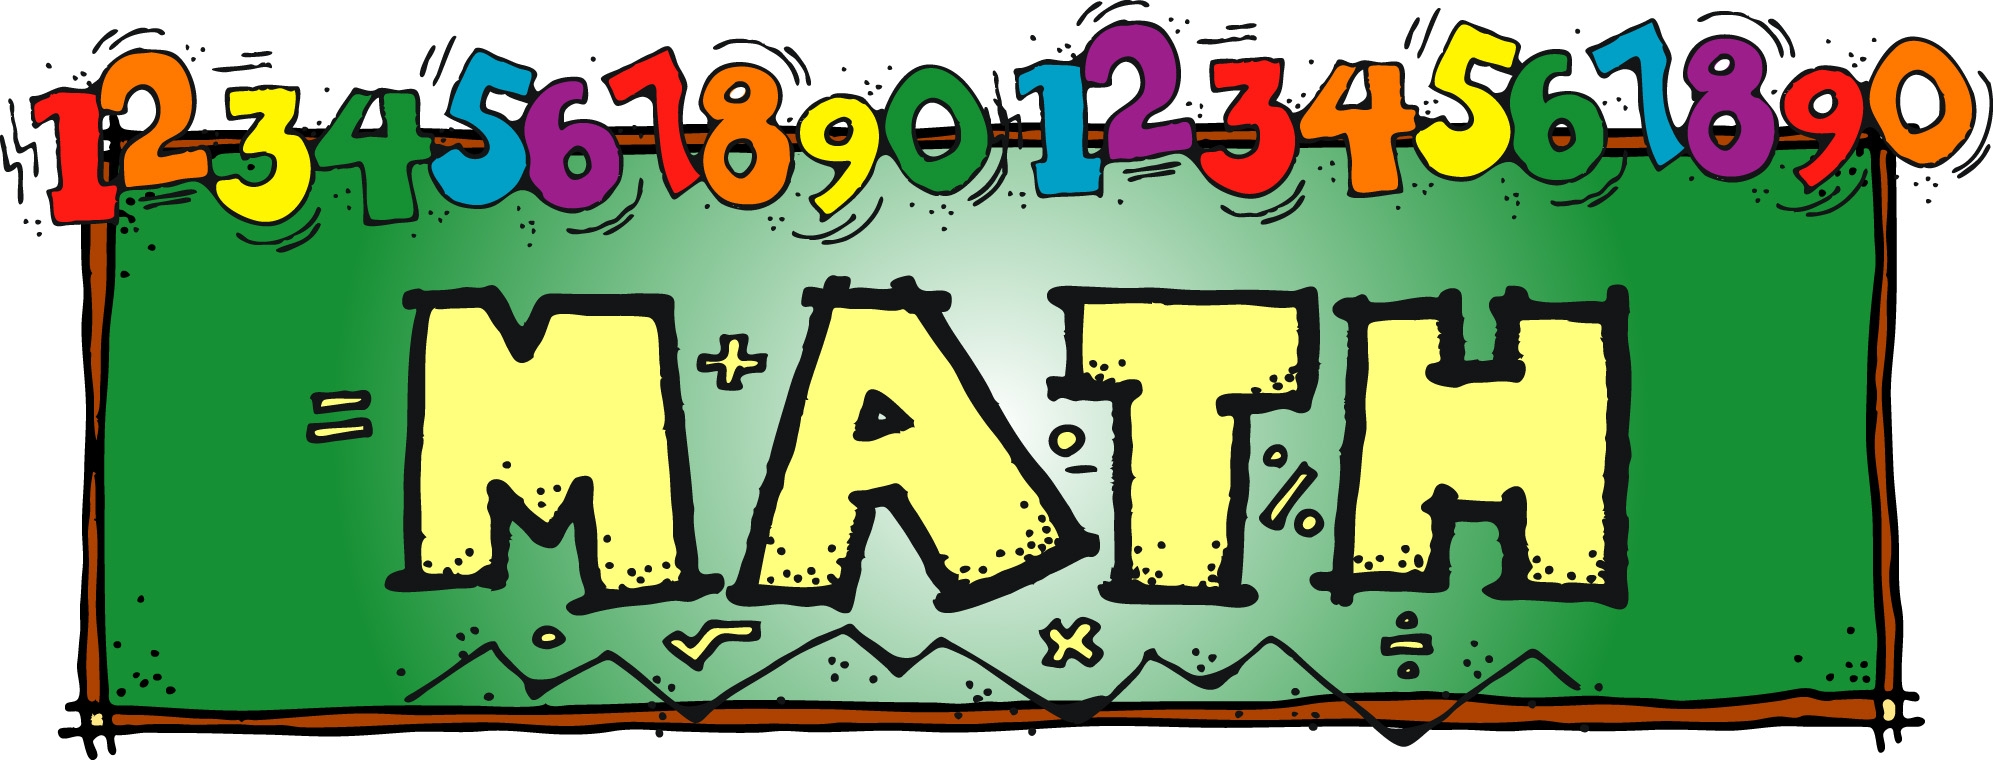 Free Math Clipart Download Free Math Clipart Png Images Free Cliparts